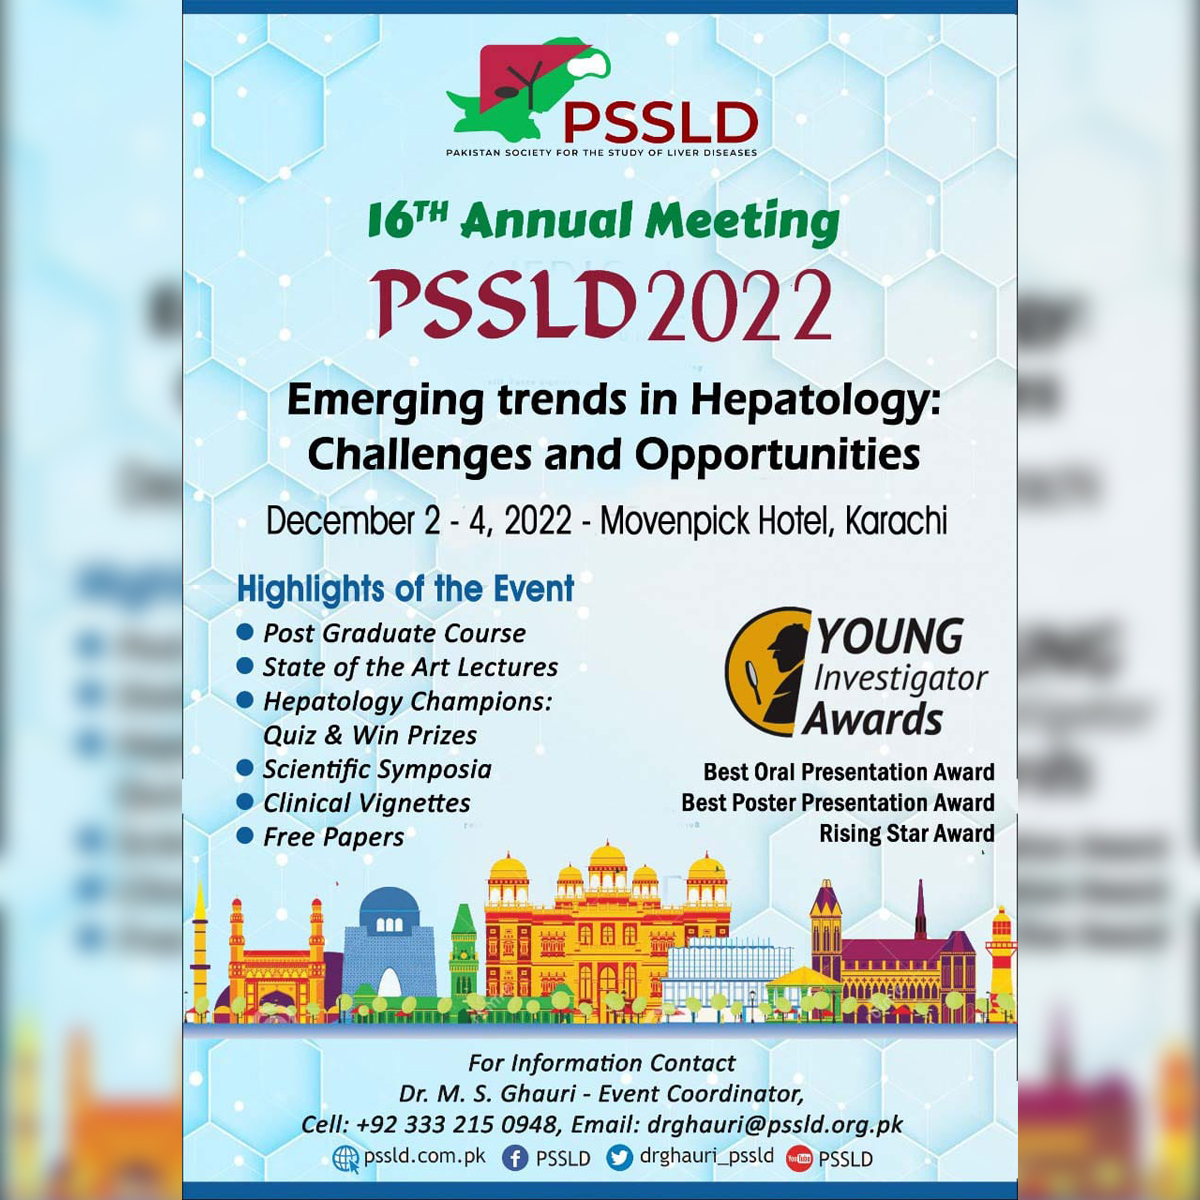 15th Annual Conference PSSLD 2021